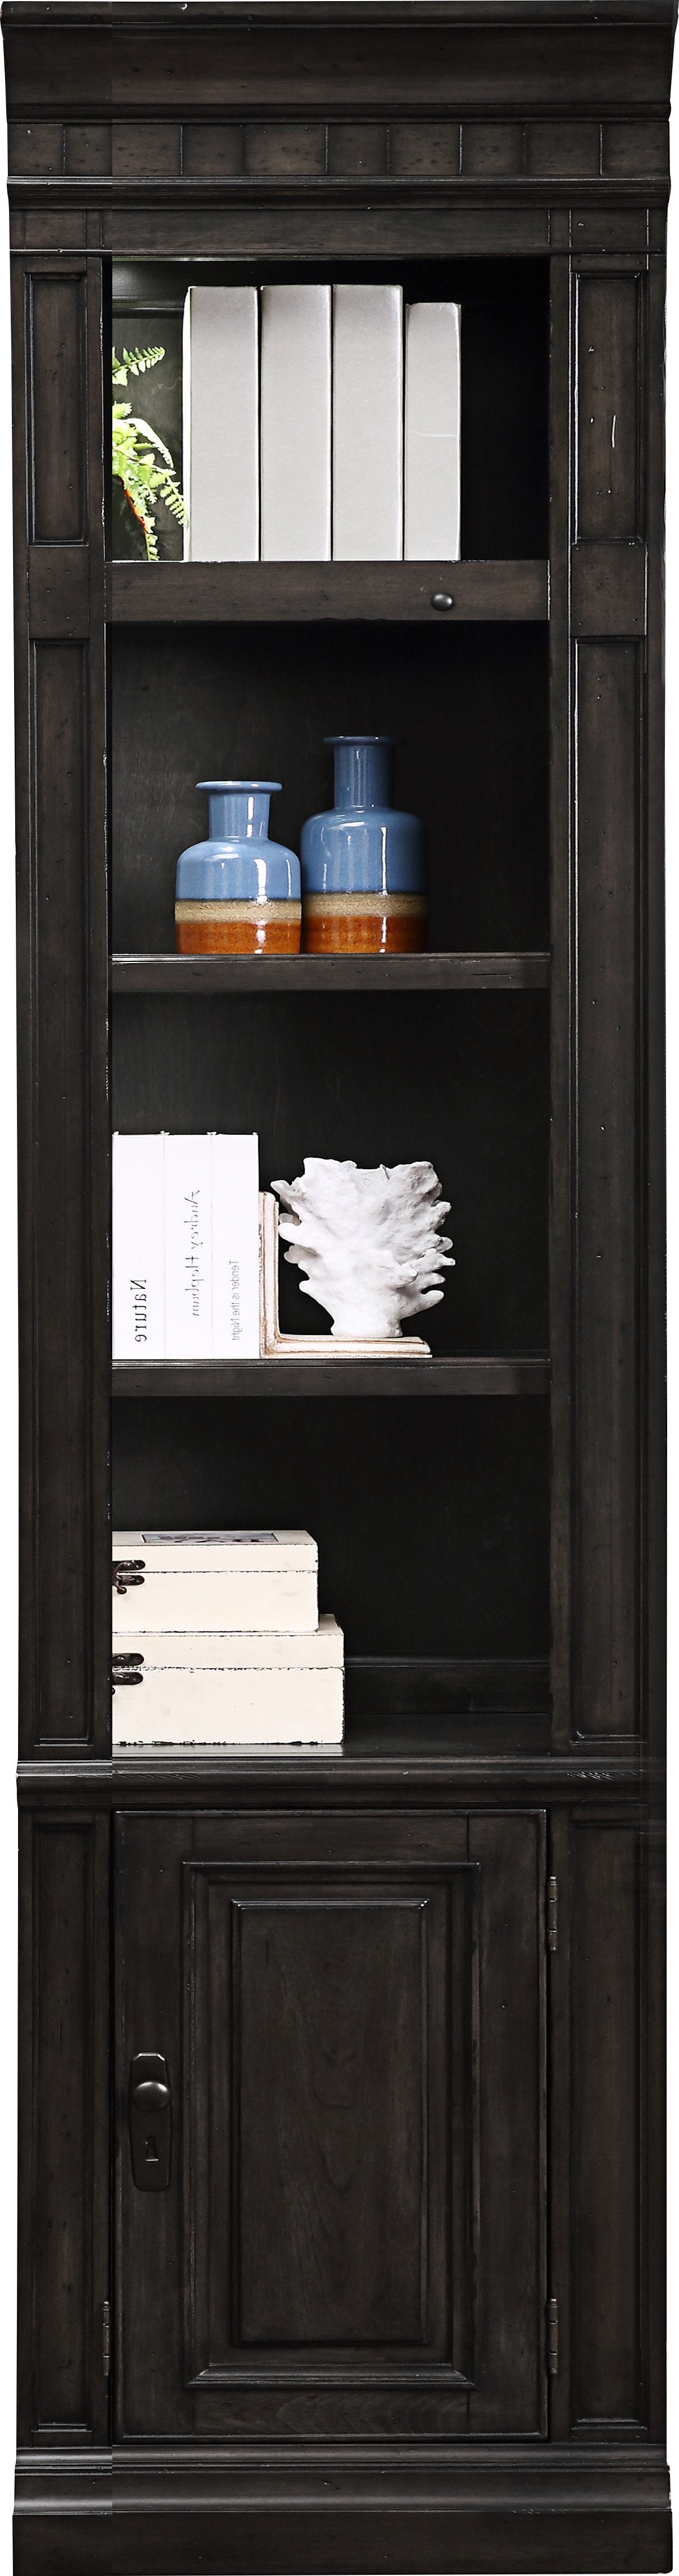 WASHINGTON HEIGHTS 22 IN. OPEN TOP BOOKCASE